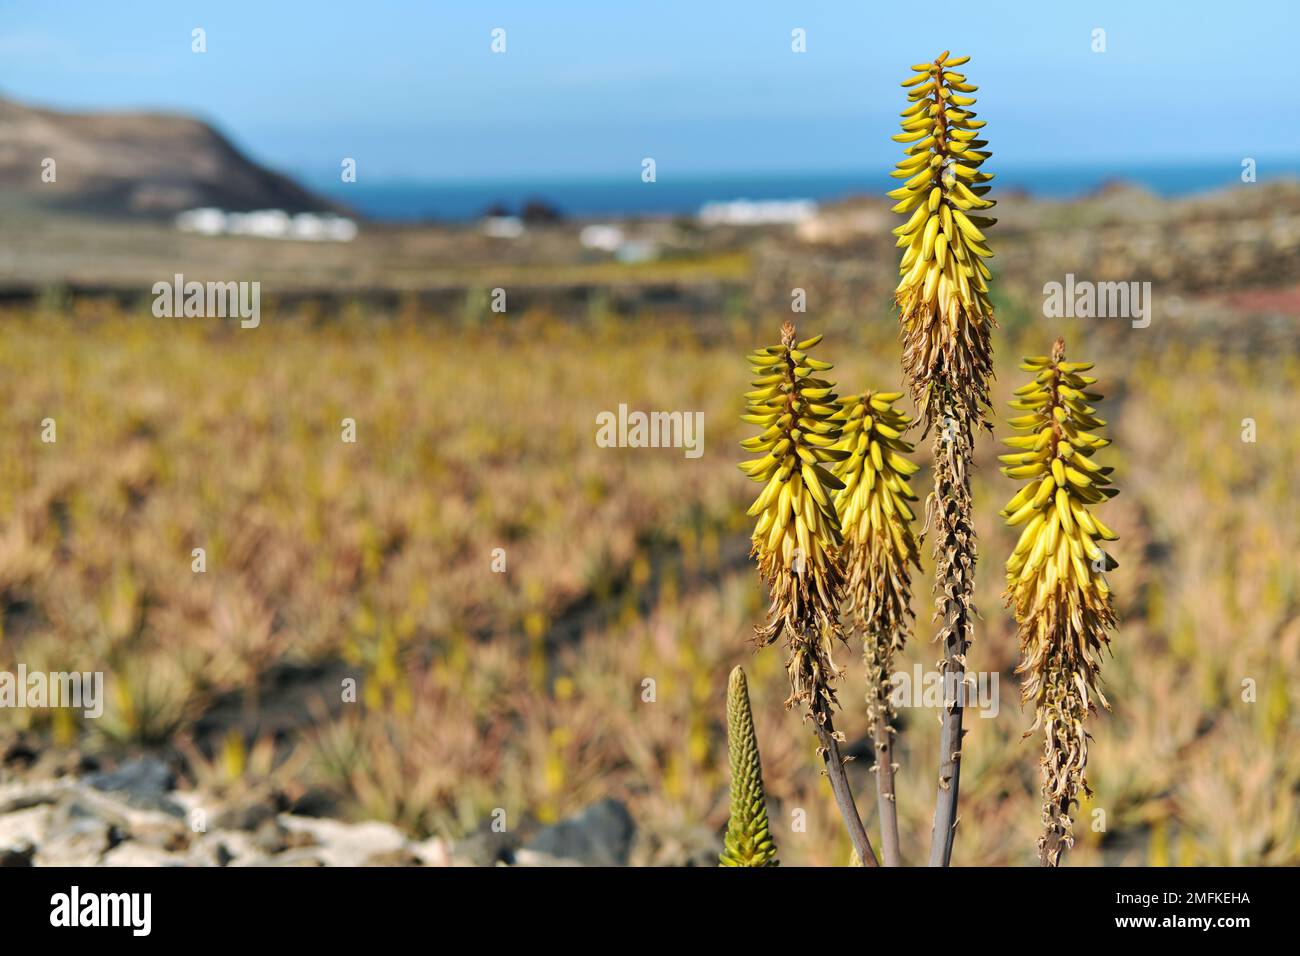 Landscape of blooming flowering succulent plants of aloe in the Lanzarote Island during sunny day. Spanish island of Canary Islands in Atlantic Ocean. Stock Photo